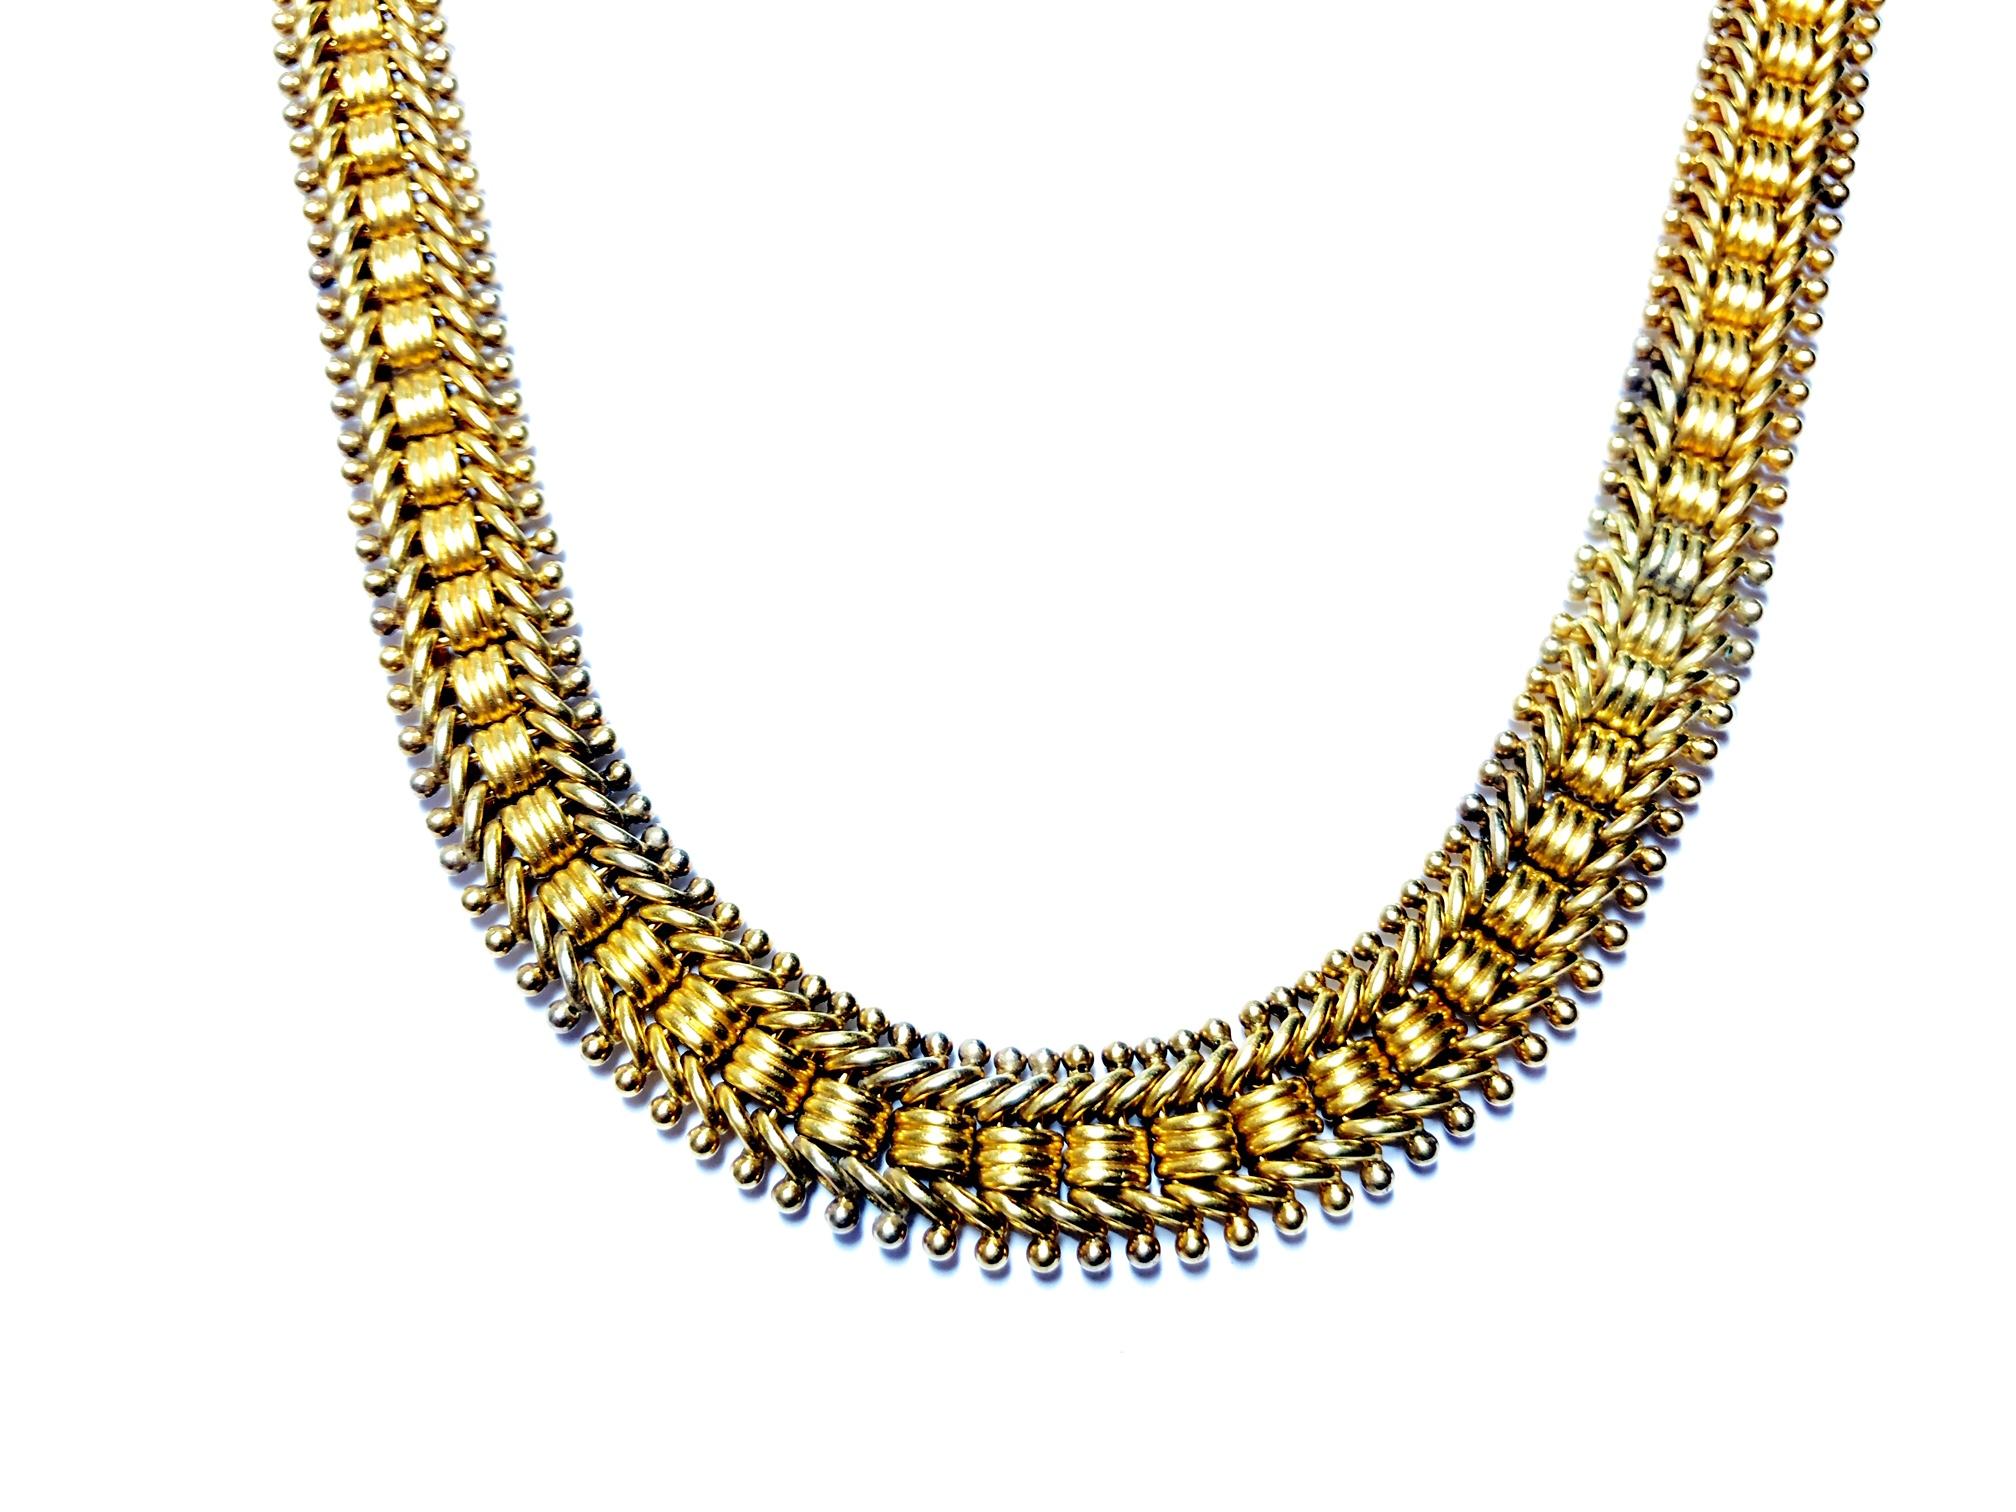 Women's or Men's Victorian Gold Necklace